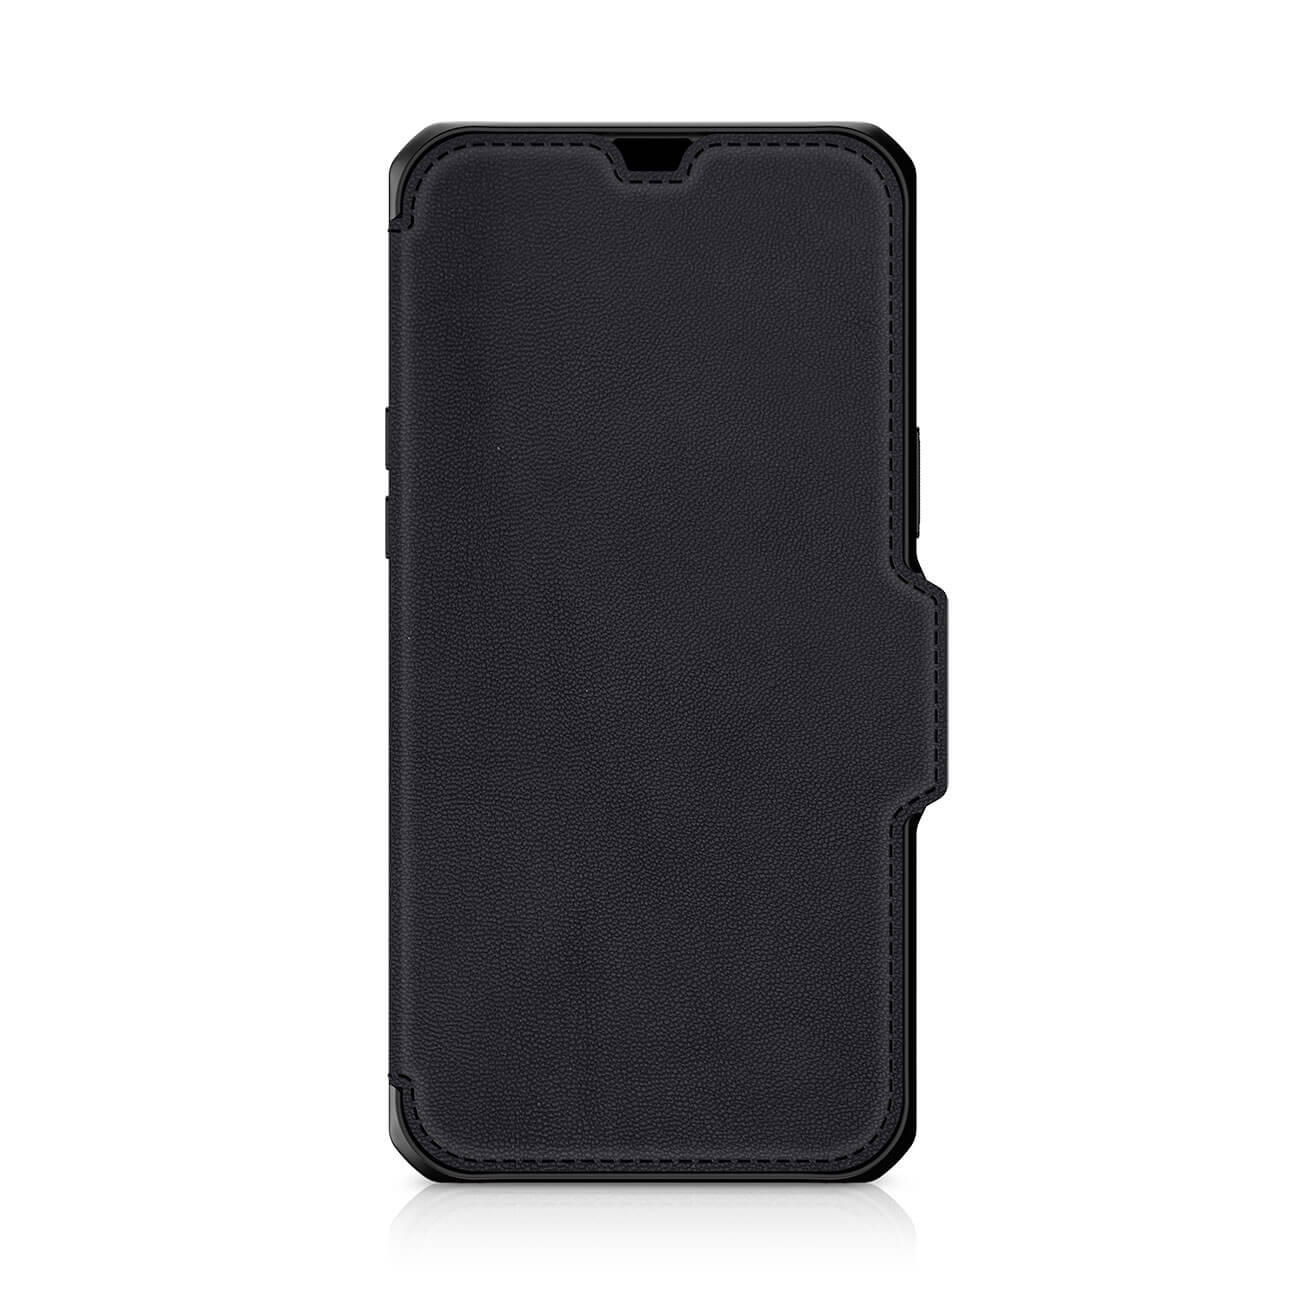 ITSKINS - Hybrid Folio Leather for iPhone 13 Pro [ Black with real leather ]